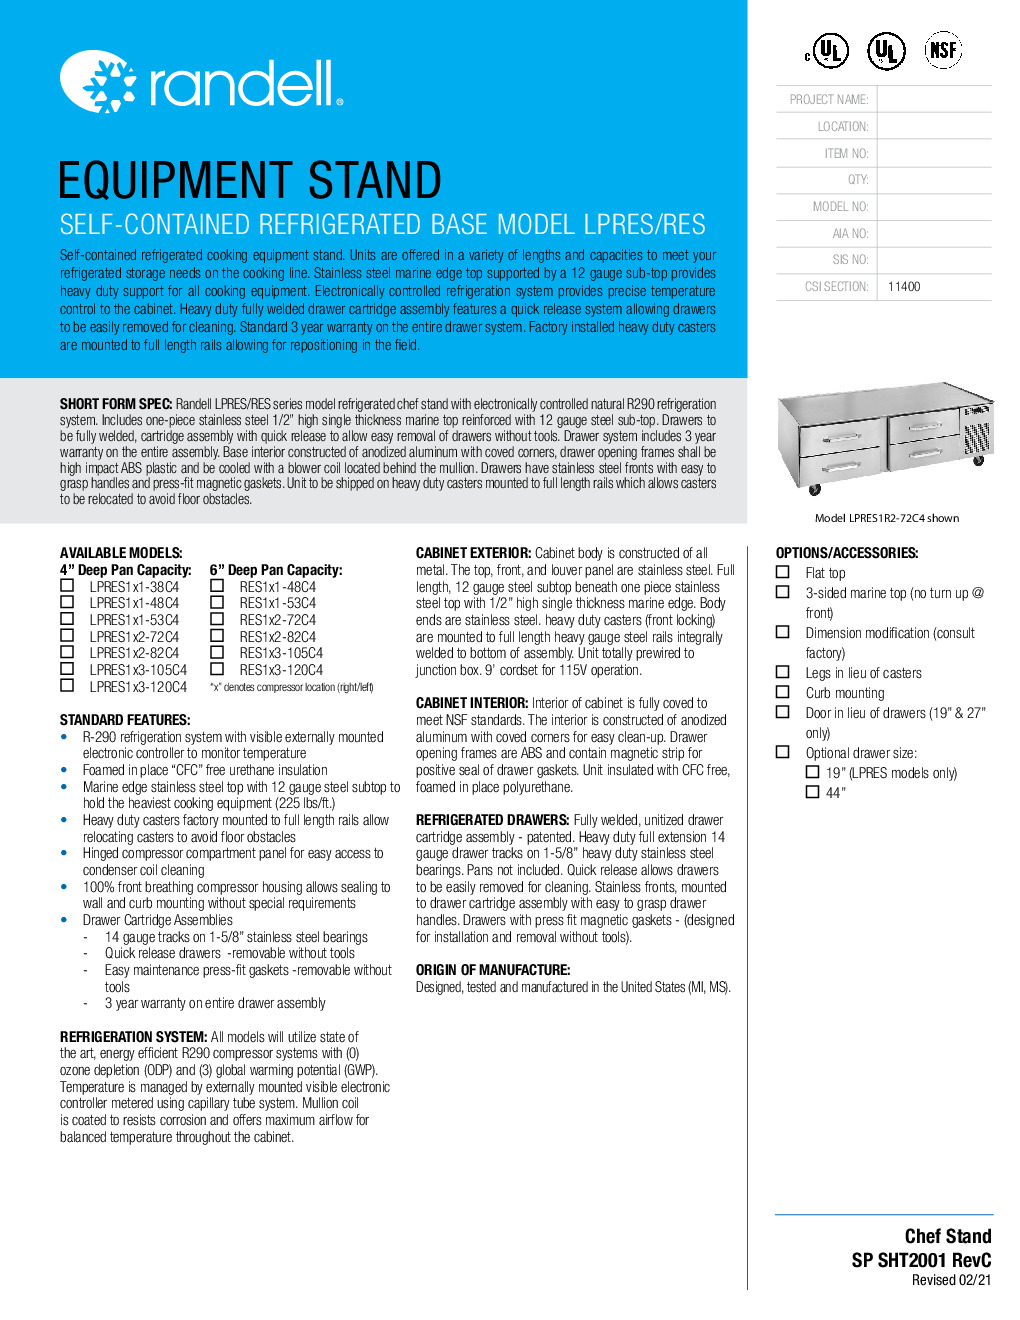 Randell RES1R3-120C4 Refrigerated Base Equipment Stand